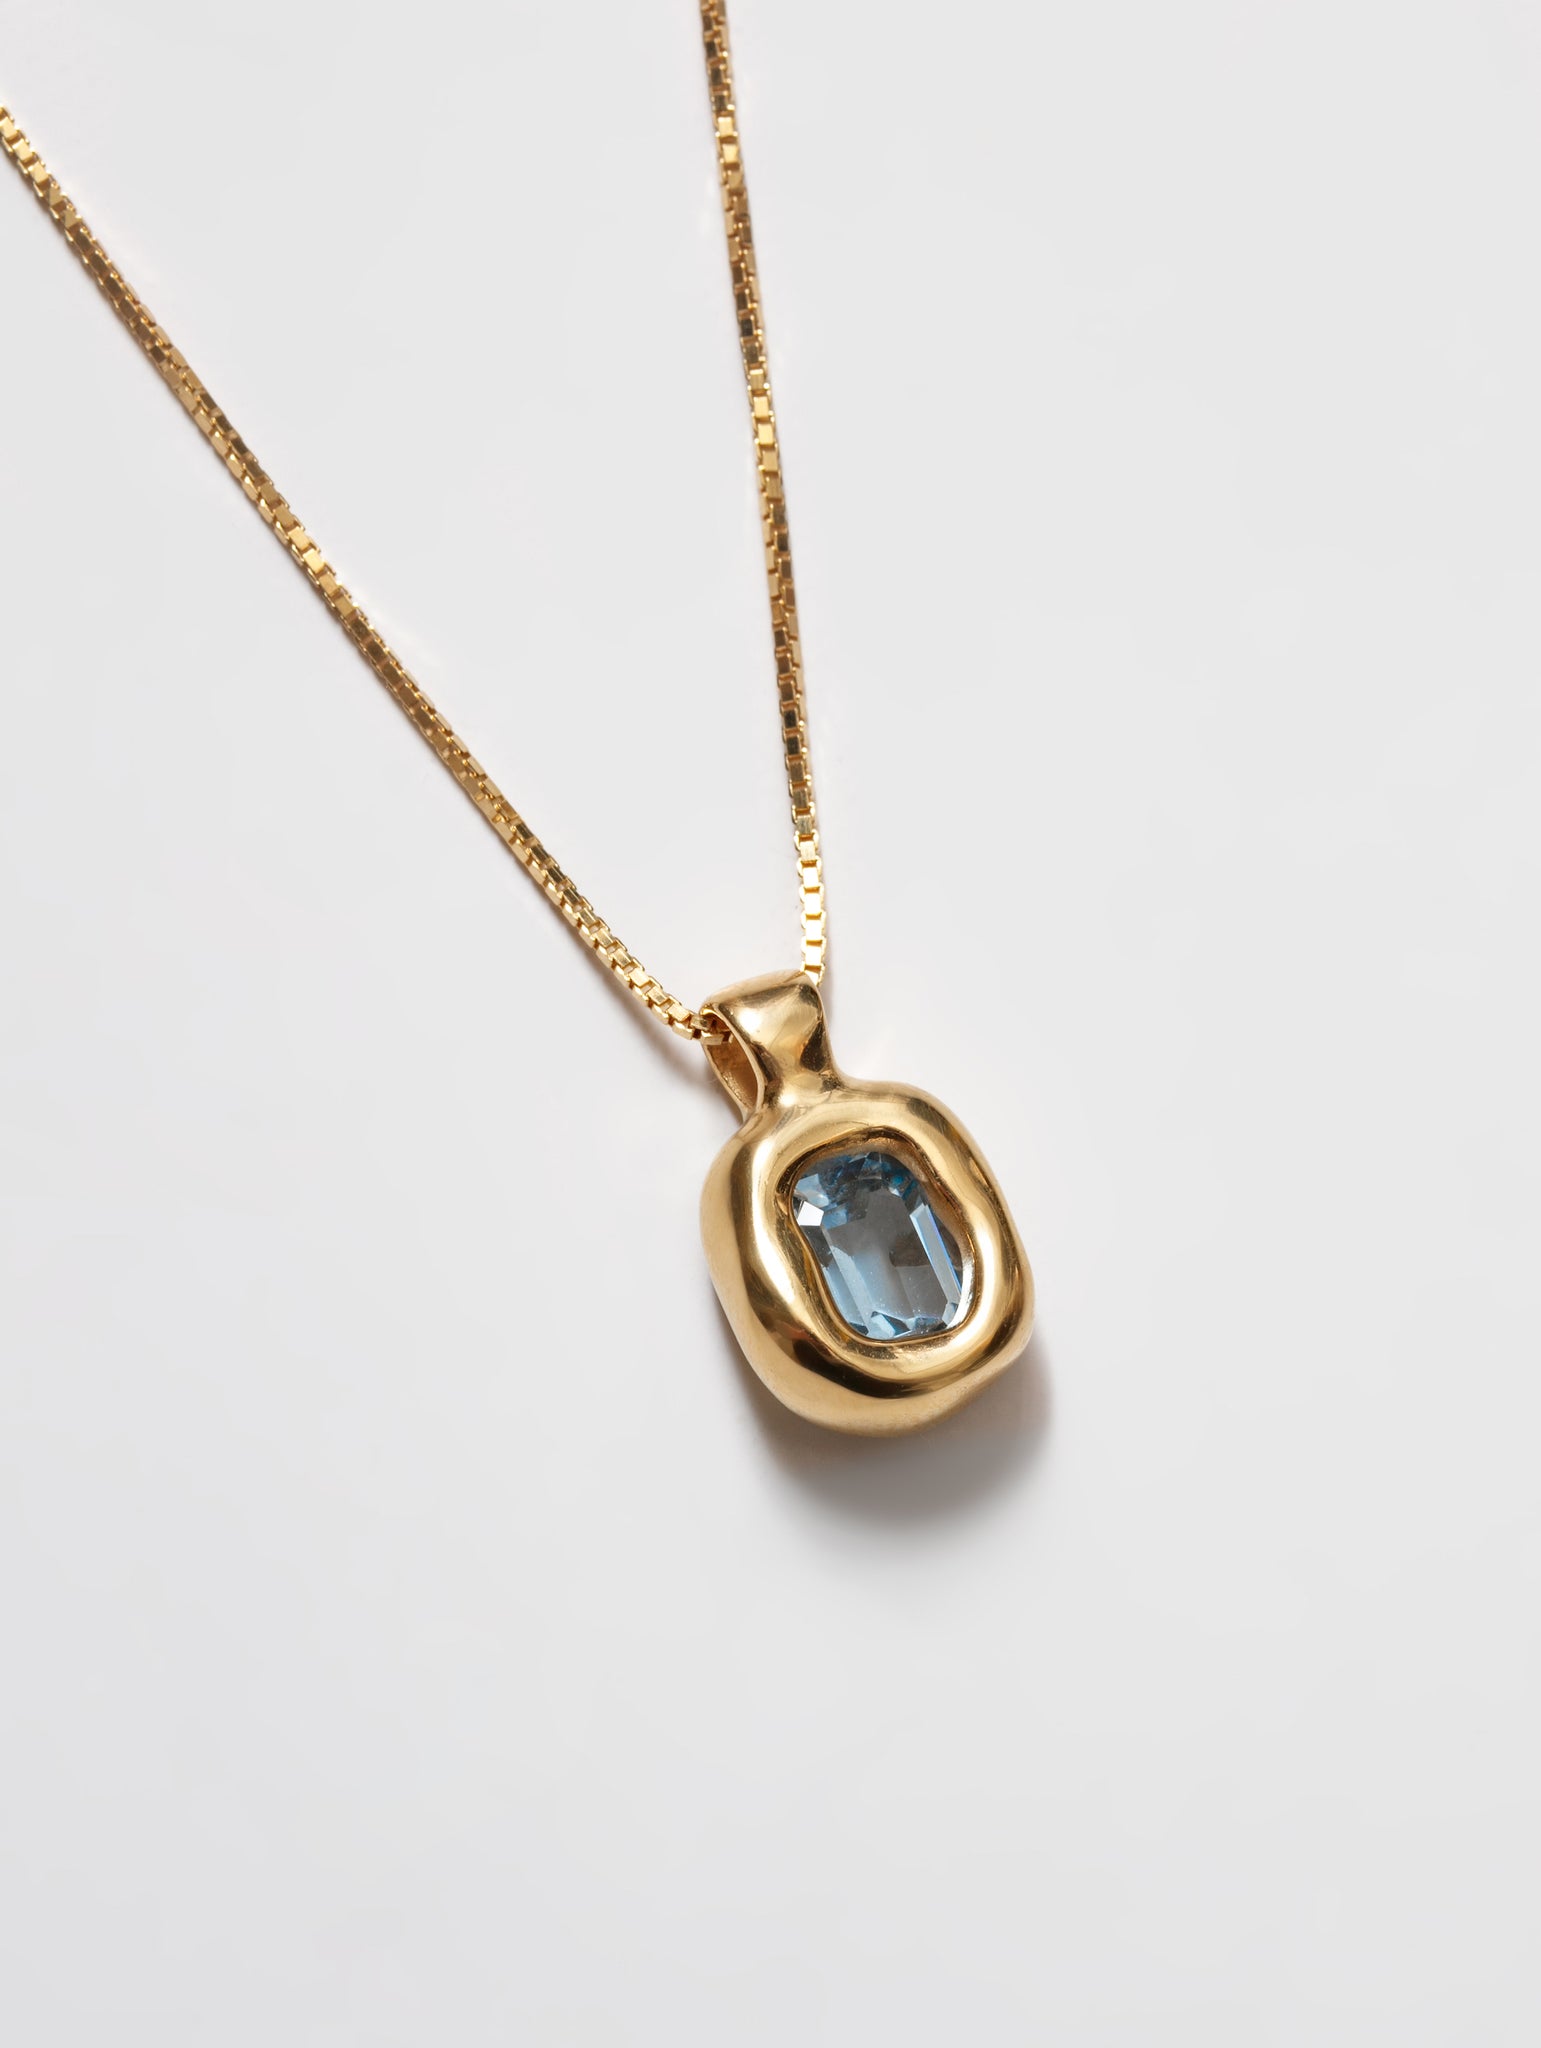 Freya Necklace in Blue and Gold